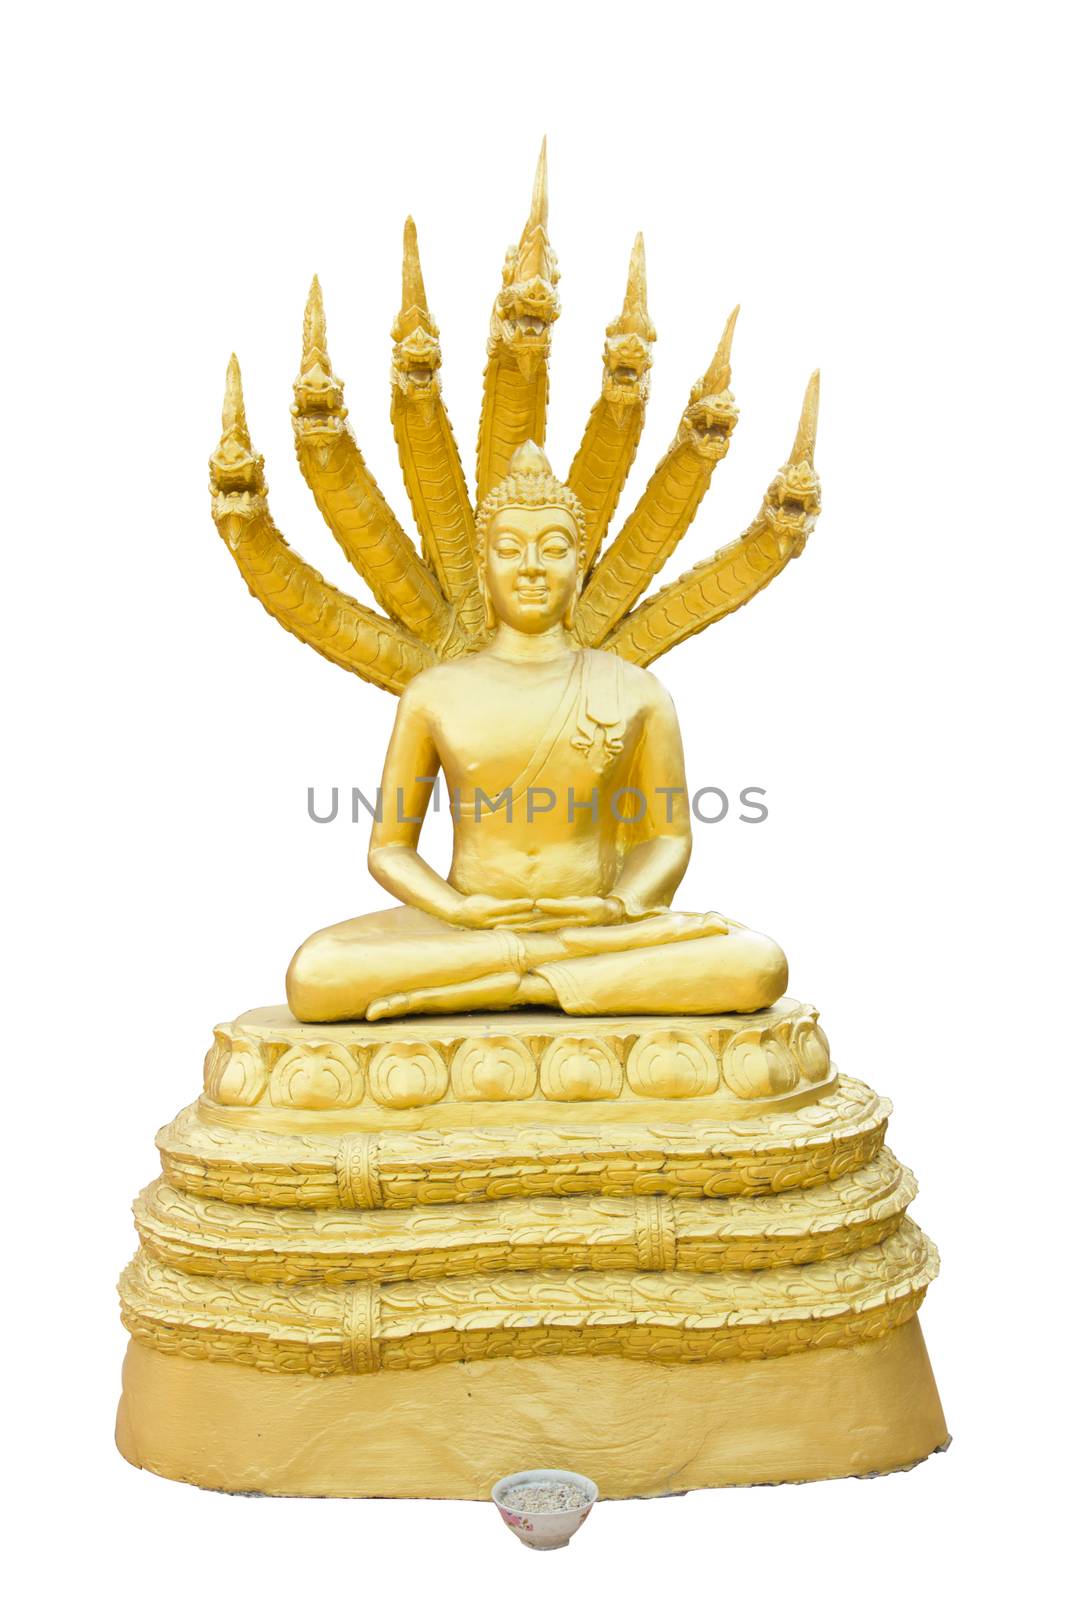 golden Buddha.Buddha on a white background. in chiangmai , Thailand, no restrict in copy or use . This photo taken these conditions